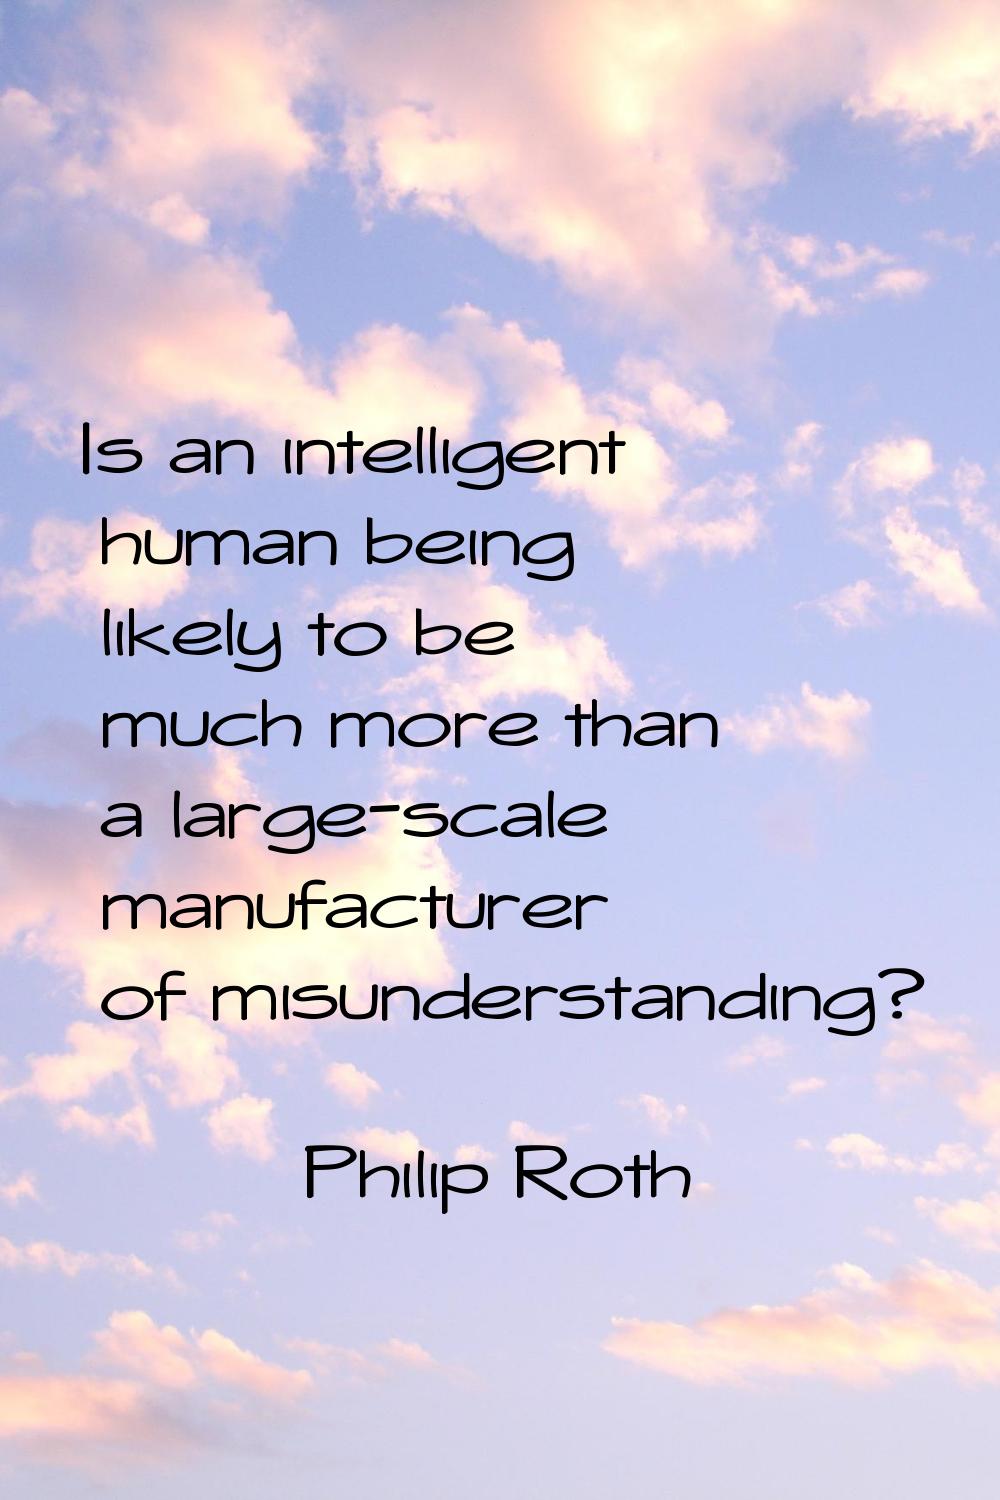 Is an intelligent human being likely to be much more than a large-scale manufacturer of misundersta